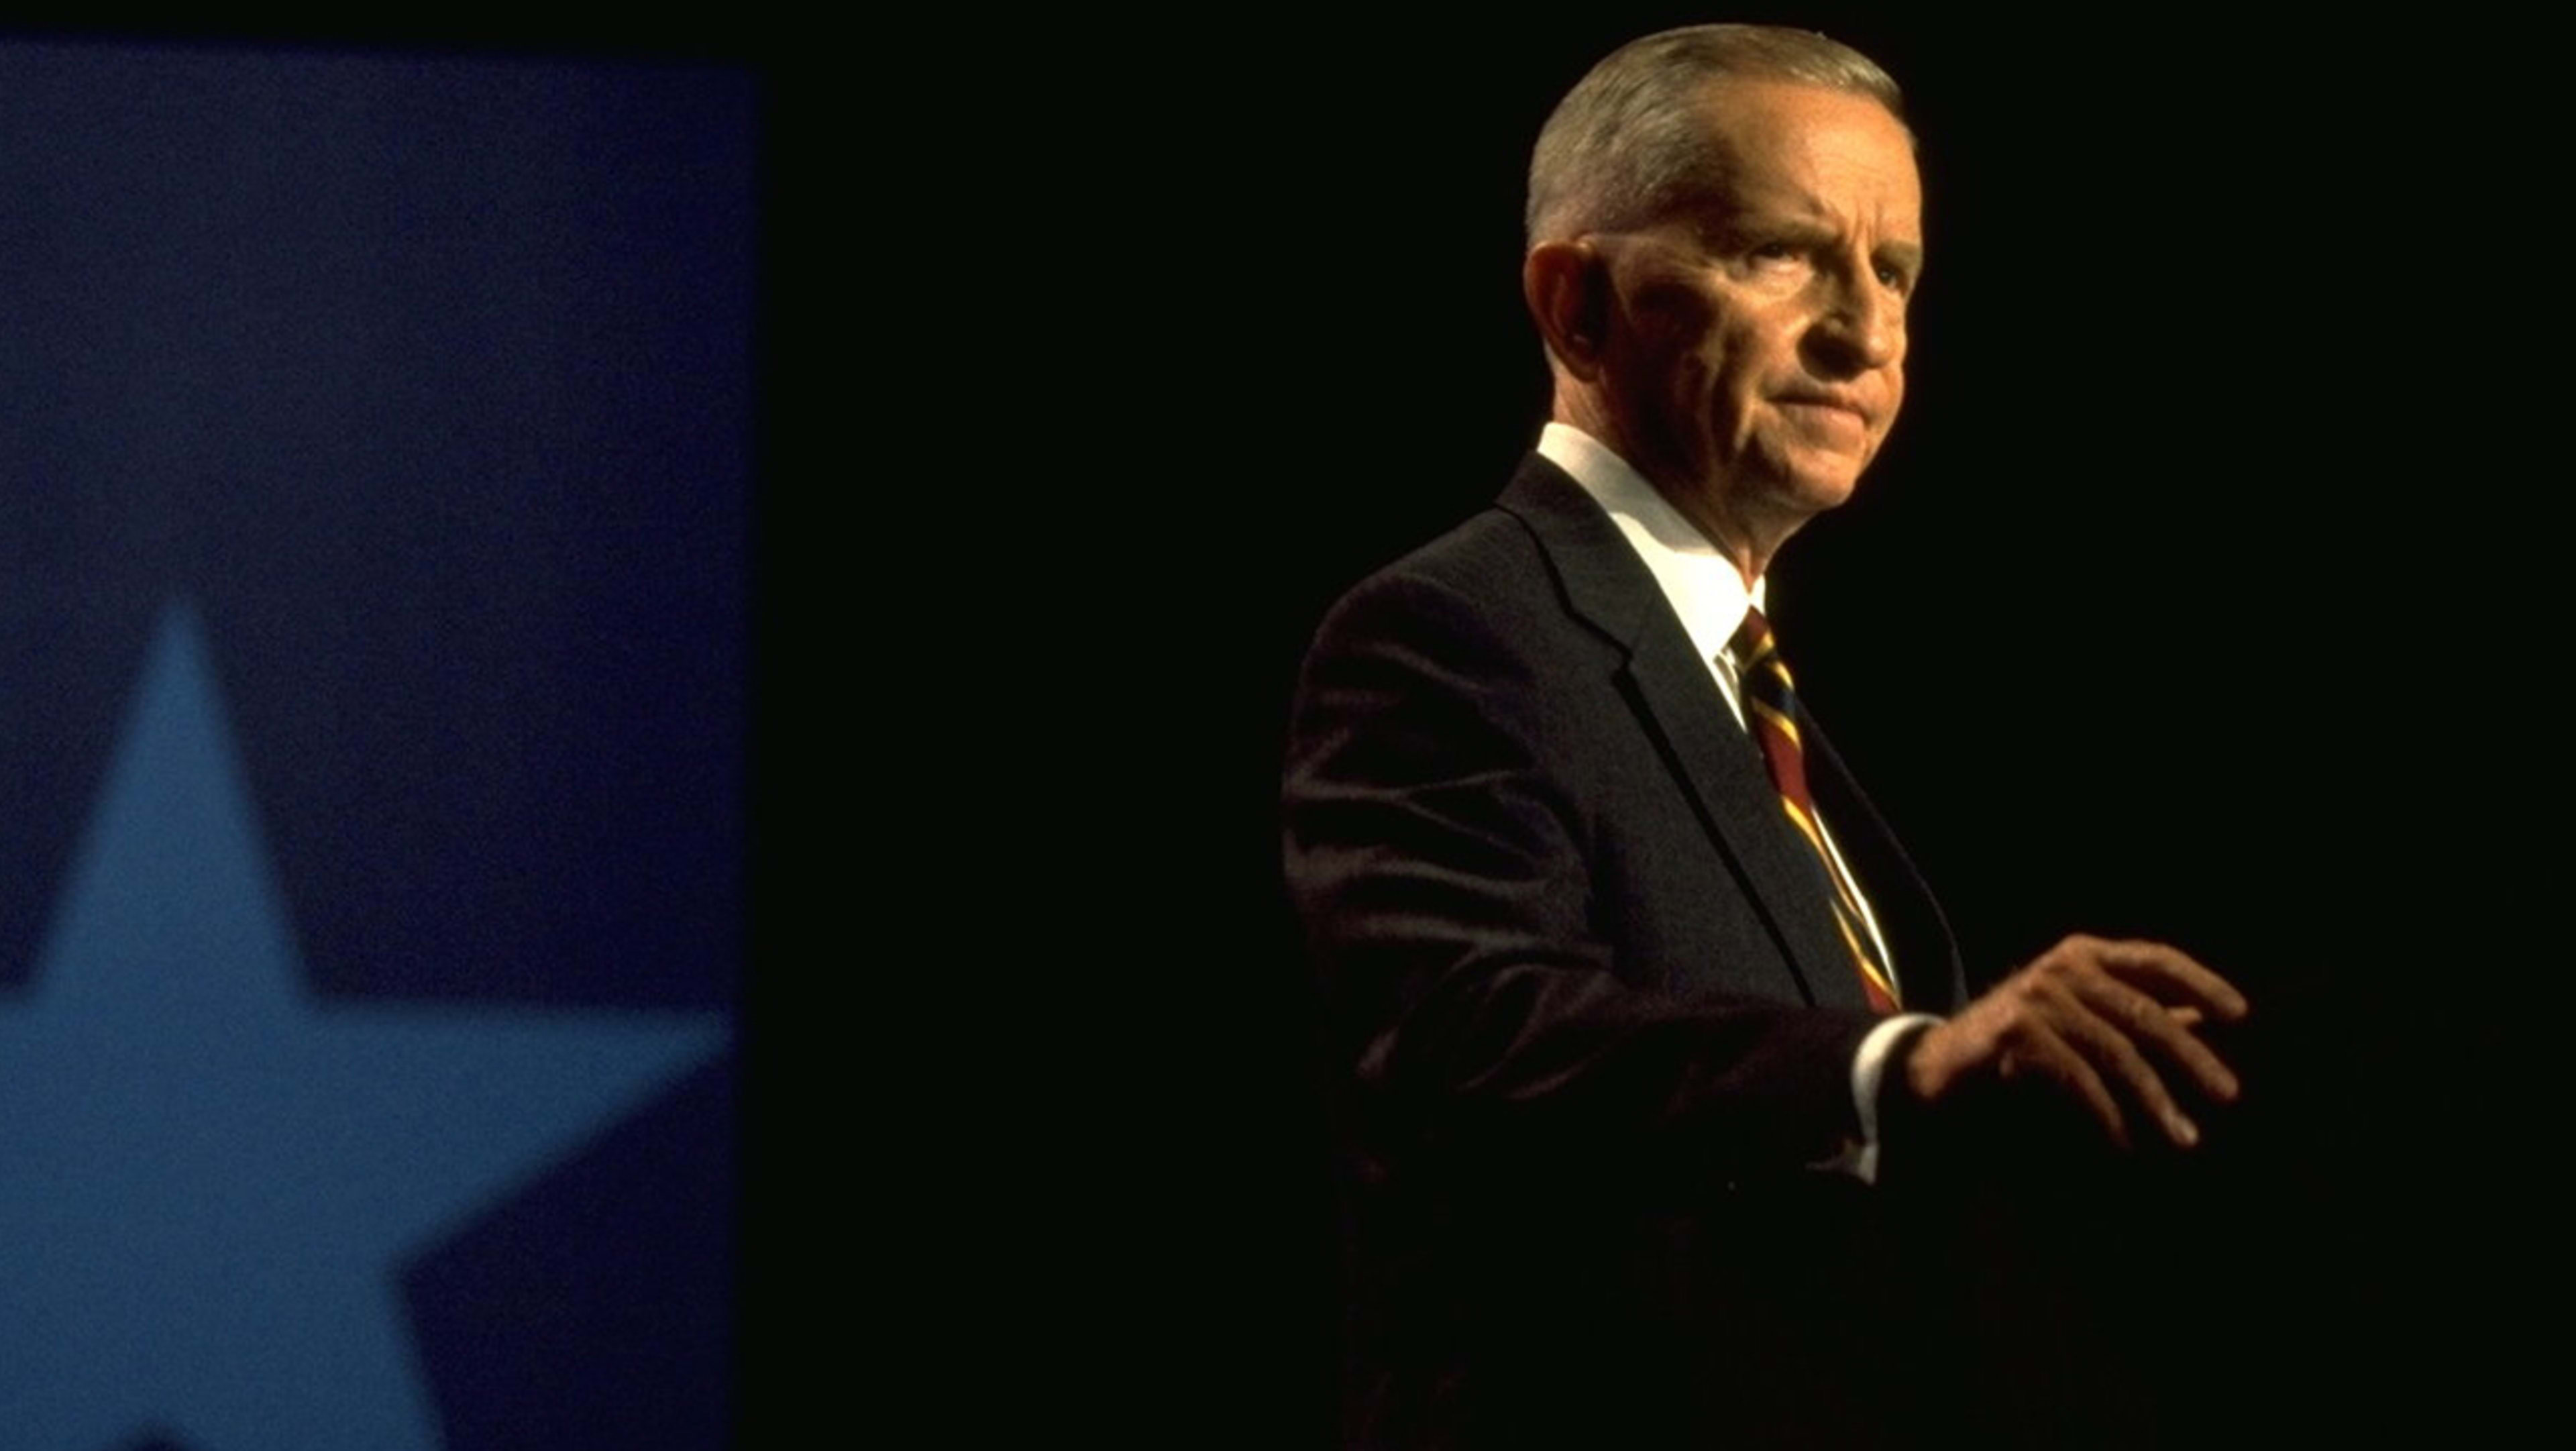 Ross Perot helped set the stage for Donald Trump in one crucial way